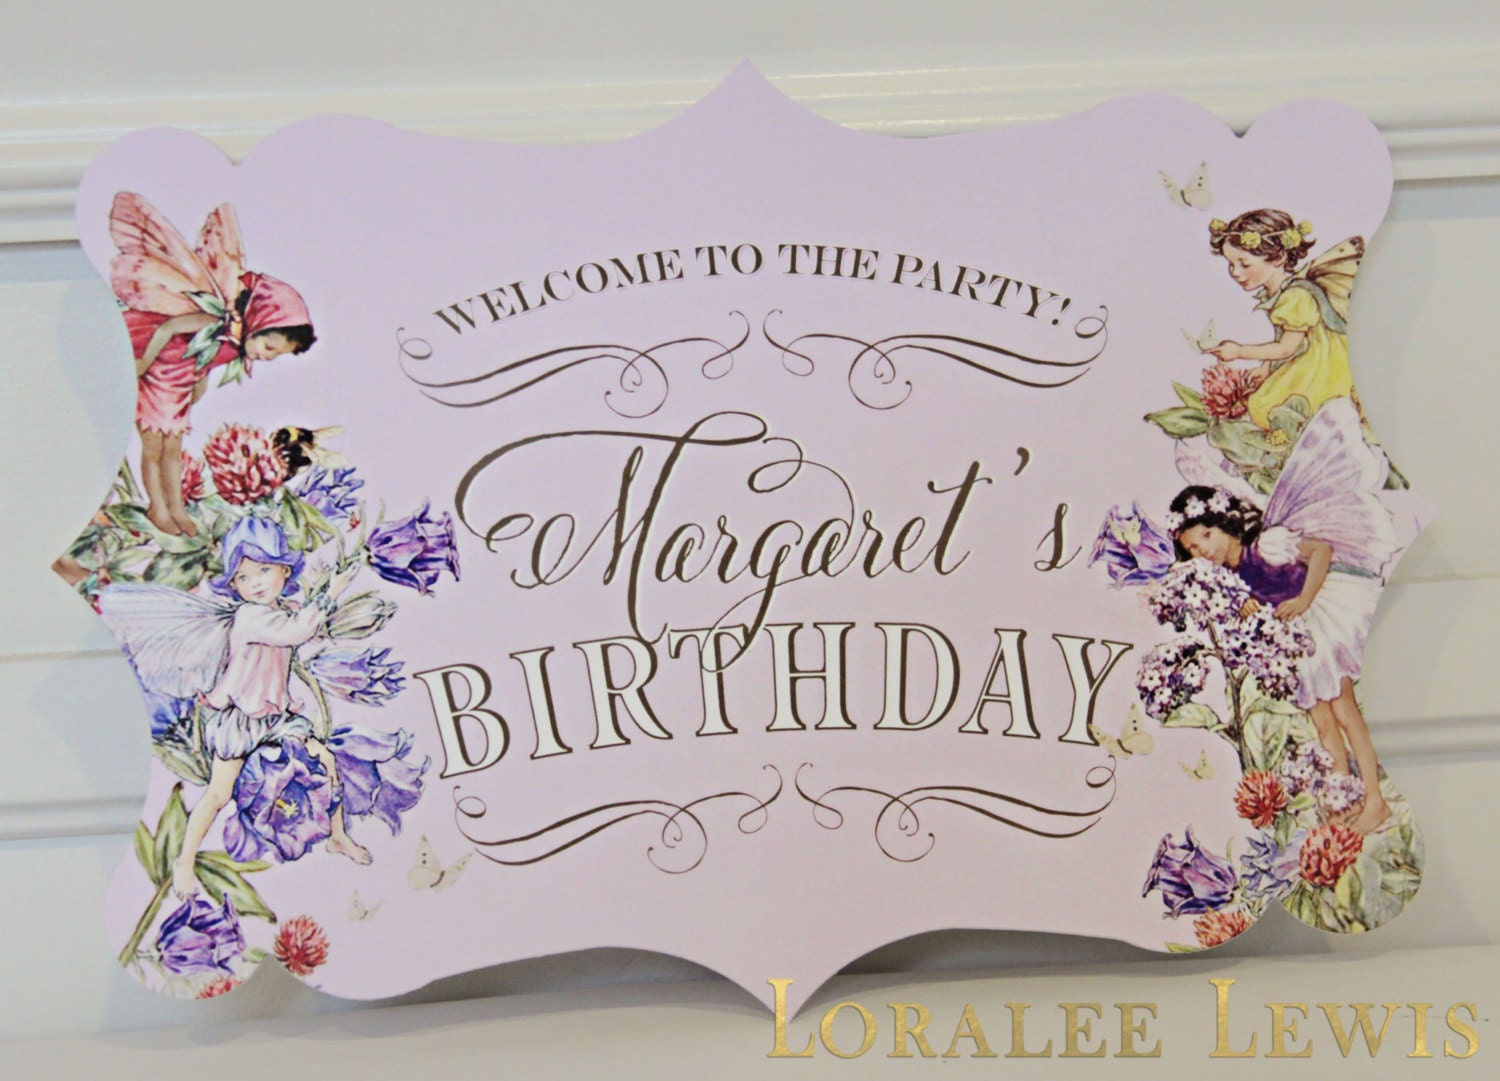 Pixie Hollow Party Event Sign By Loralee Lewis